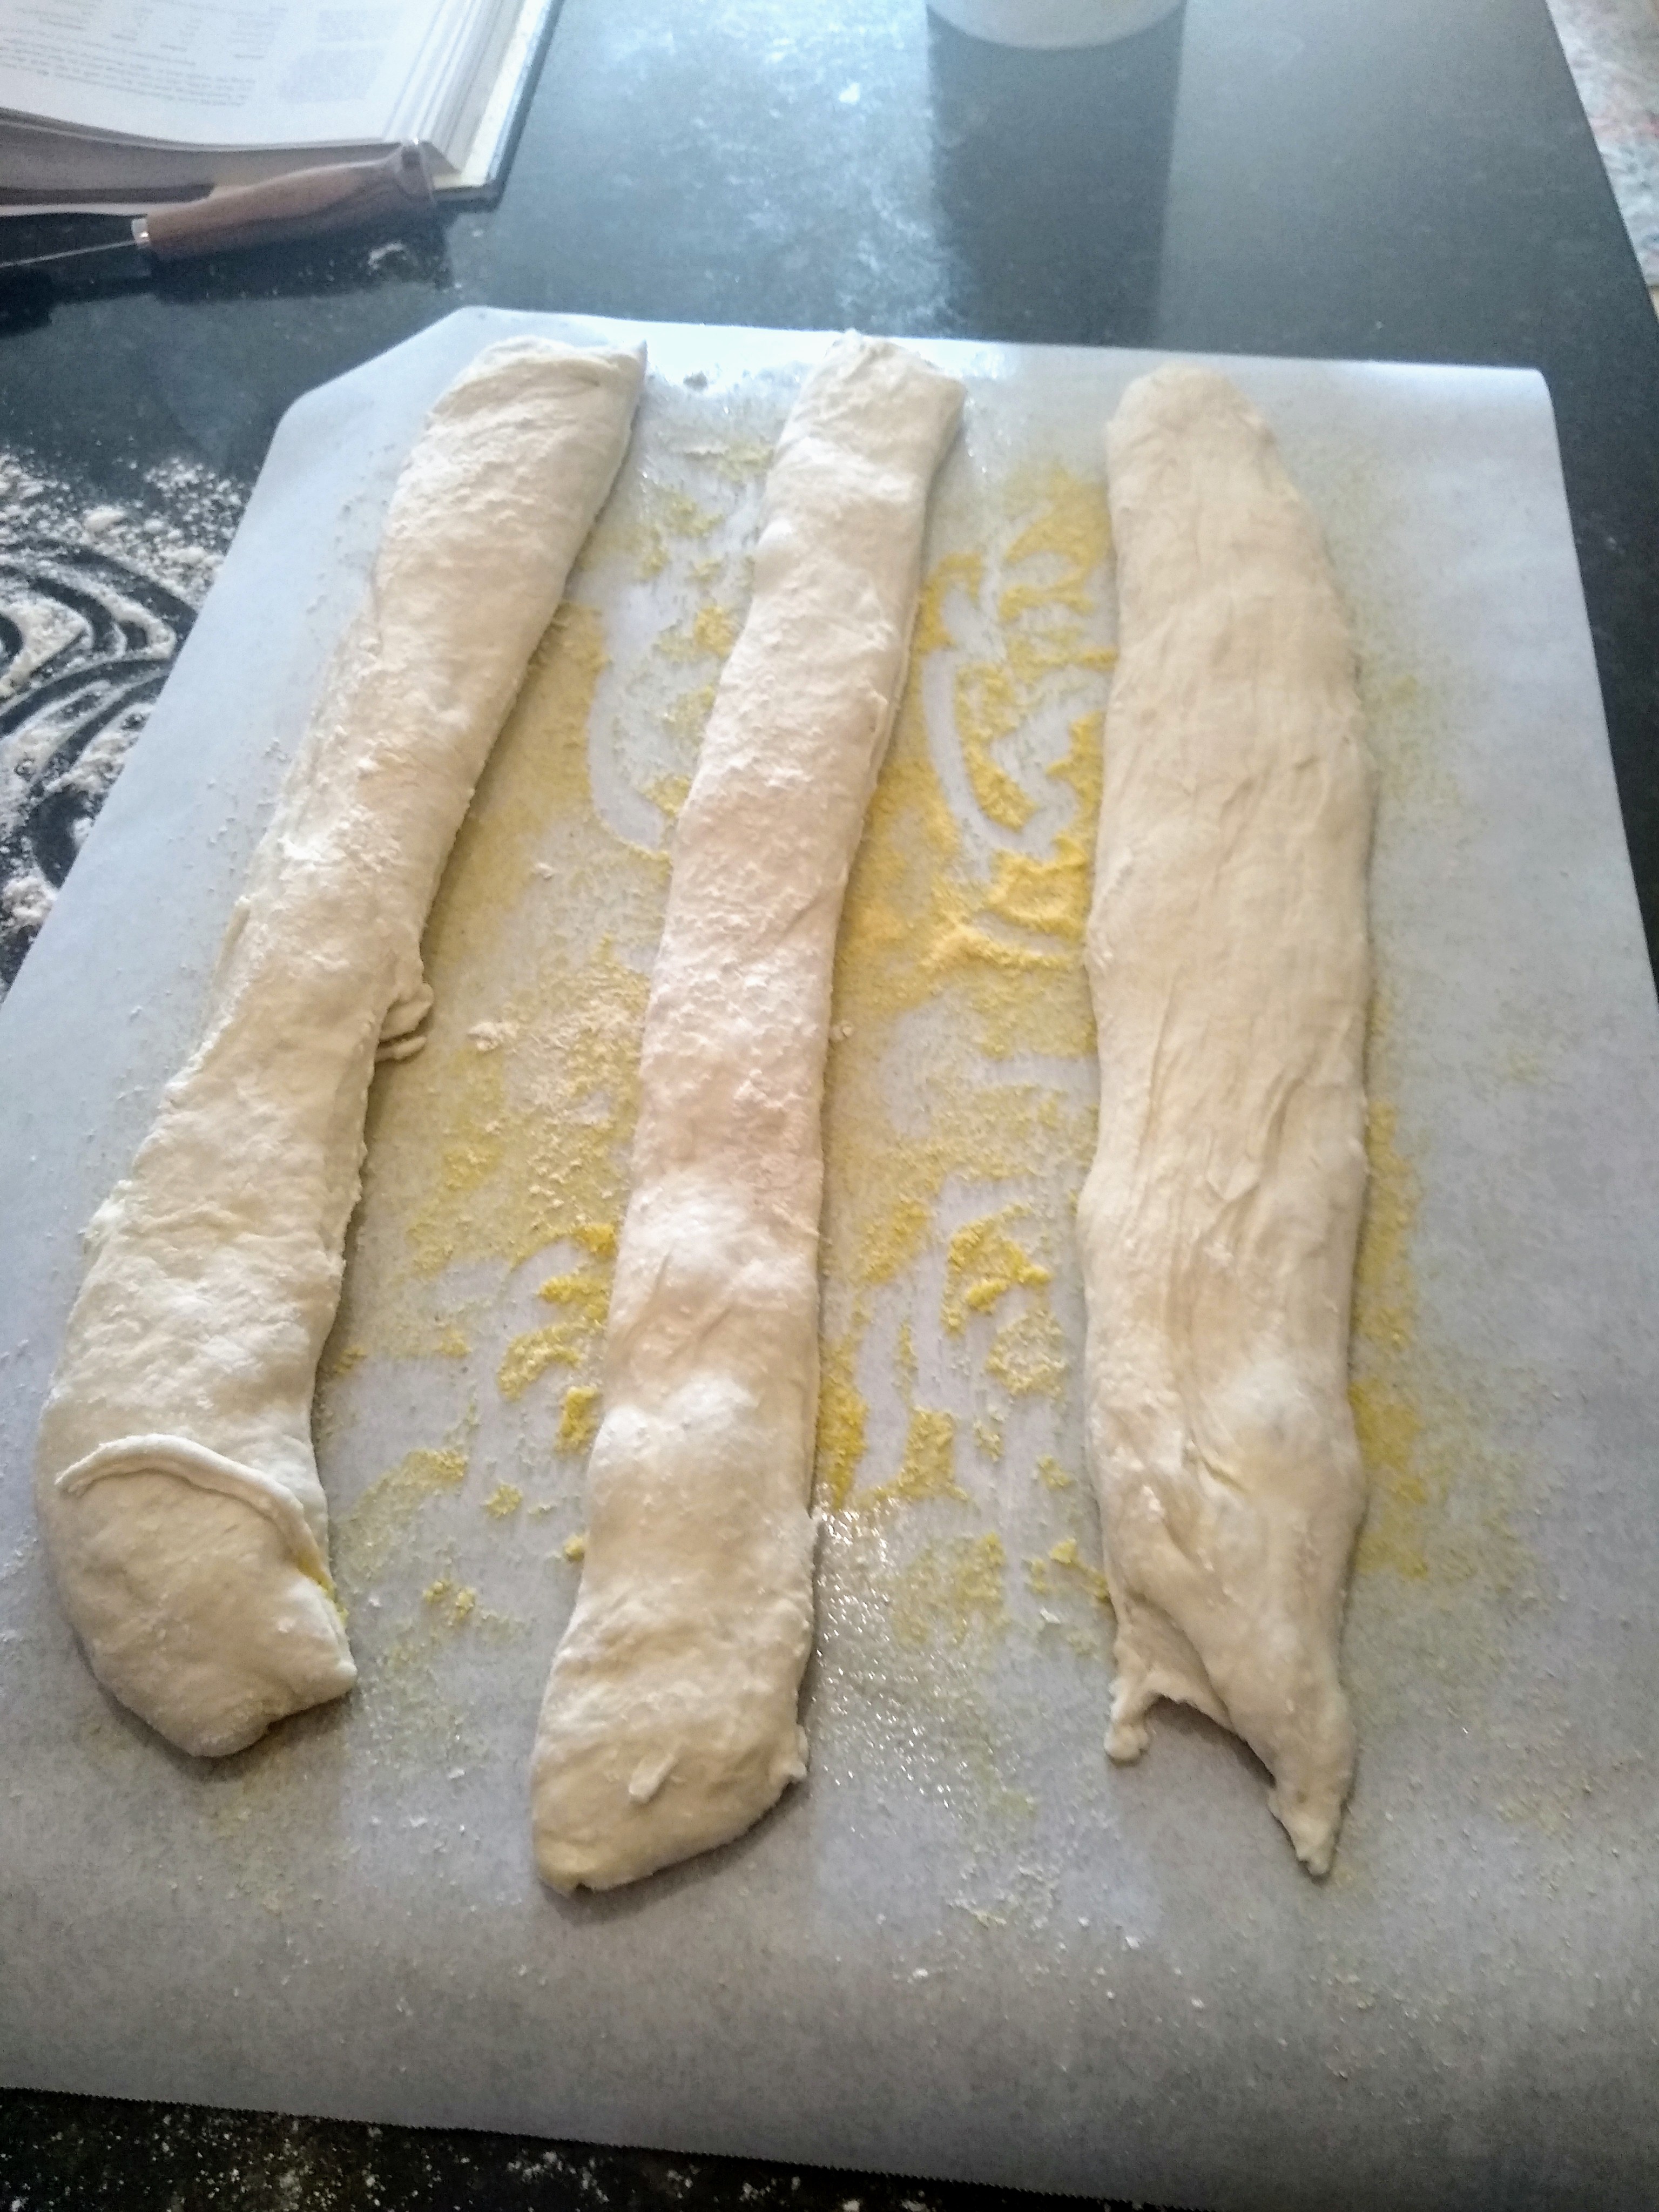 Dough shaped into three baguettes